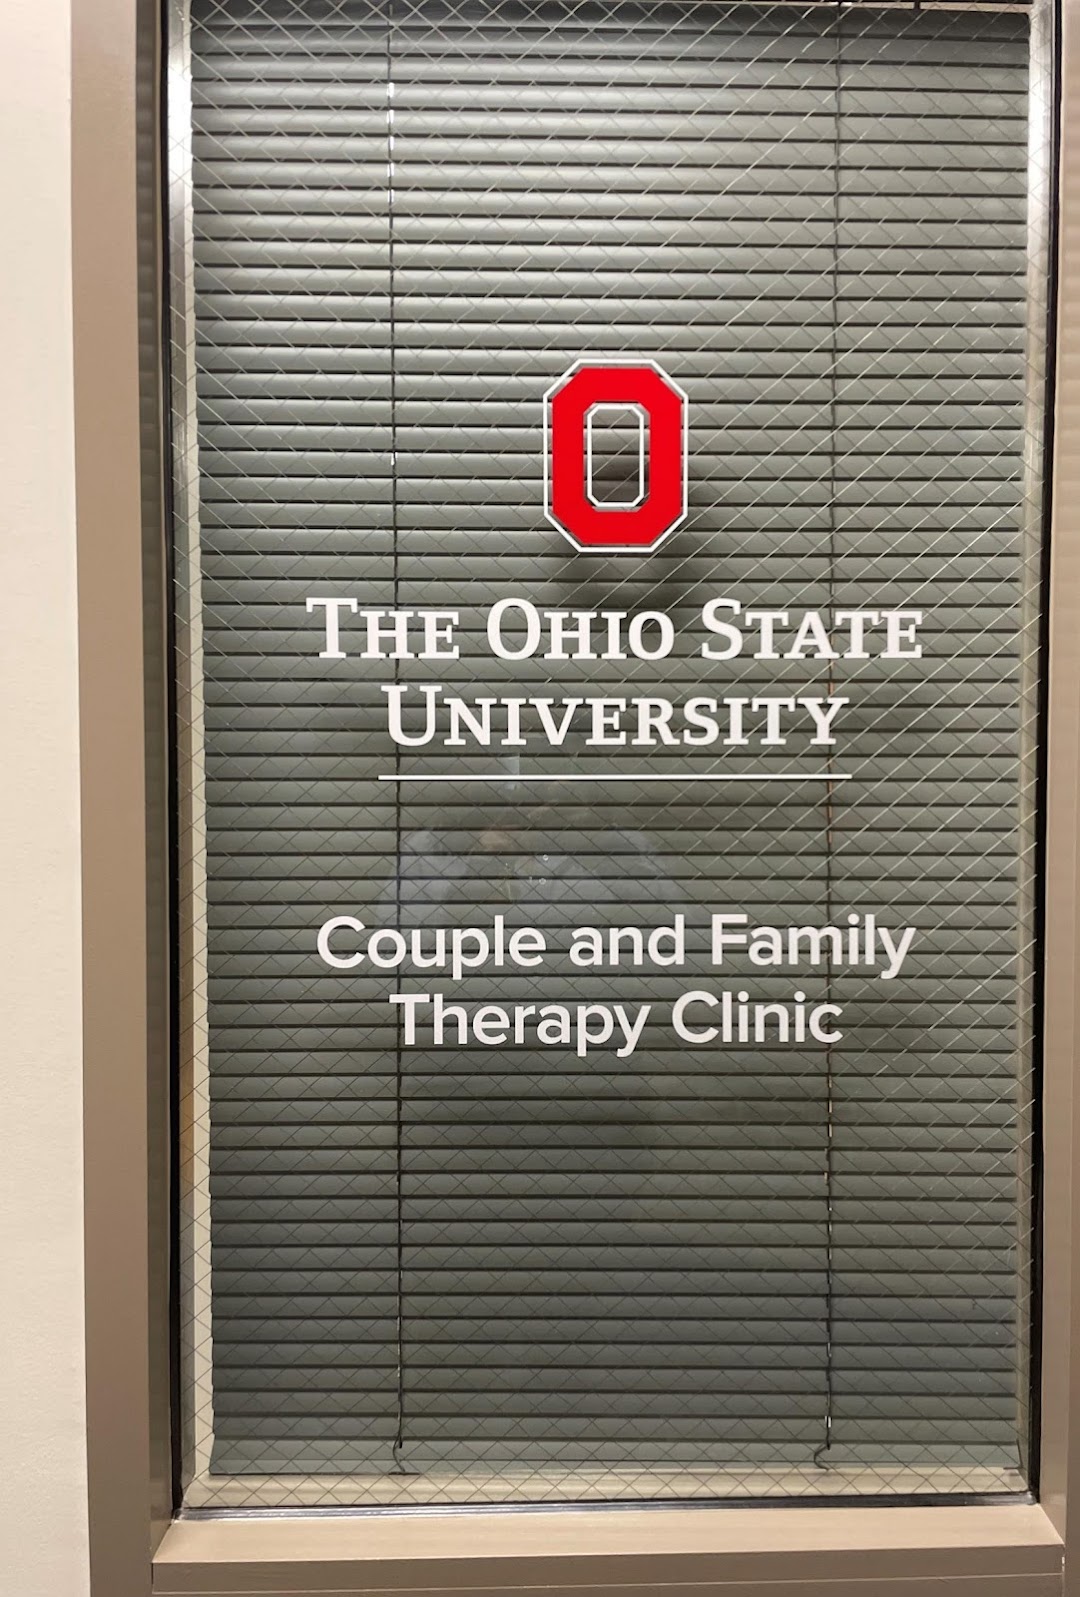 Ohio State University Couple and Family Therapy Clinic